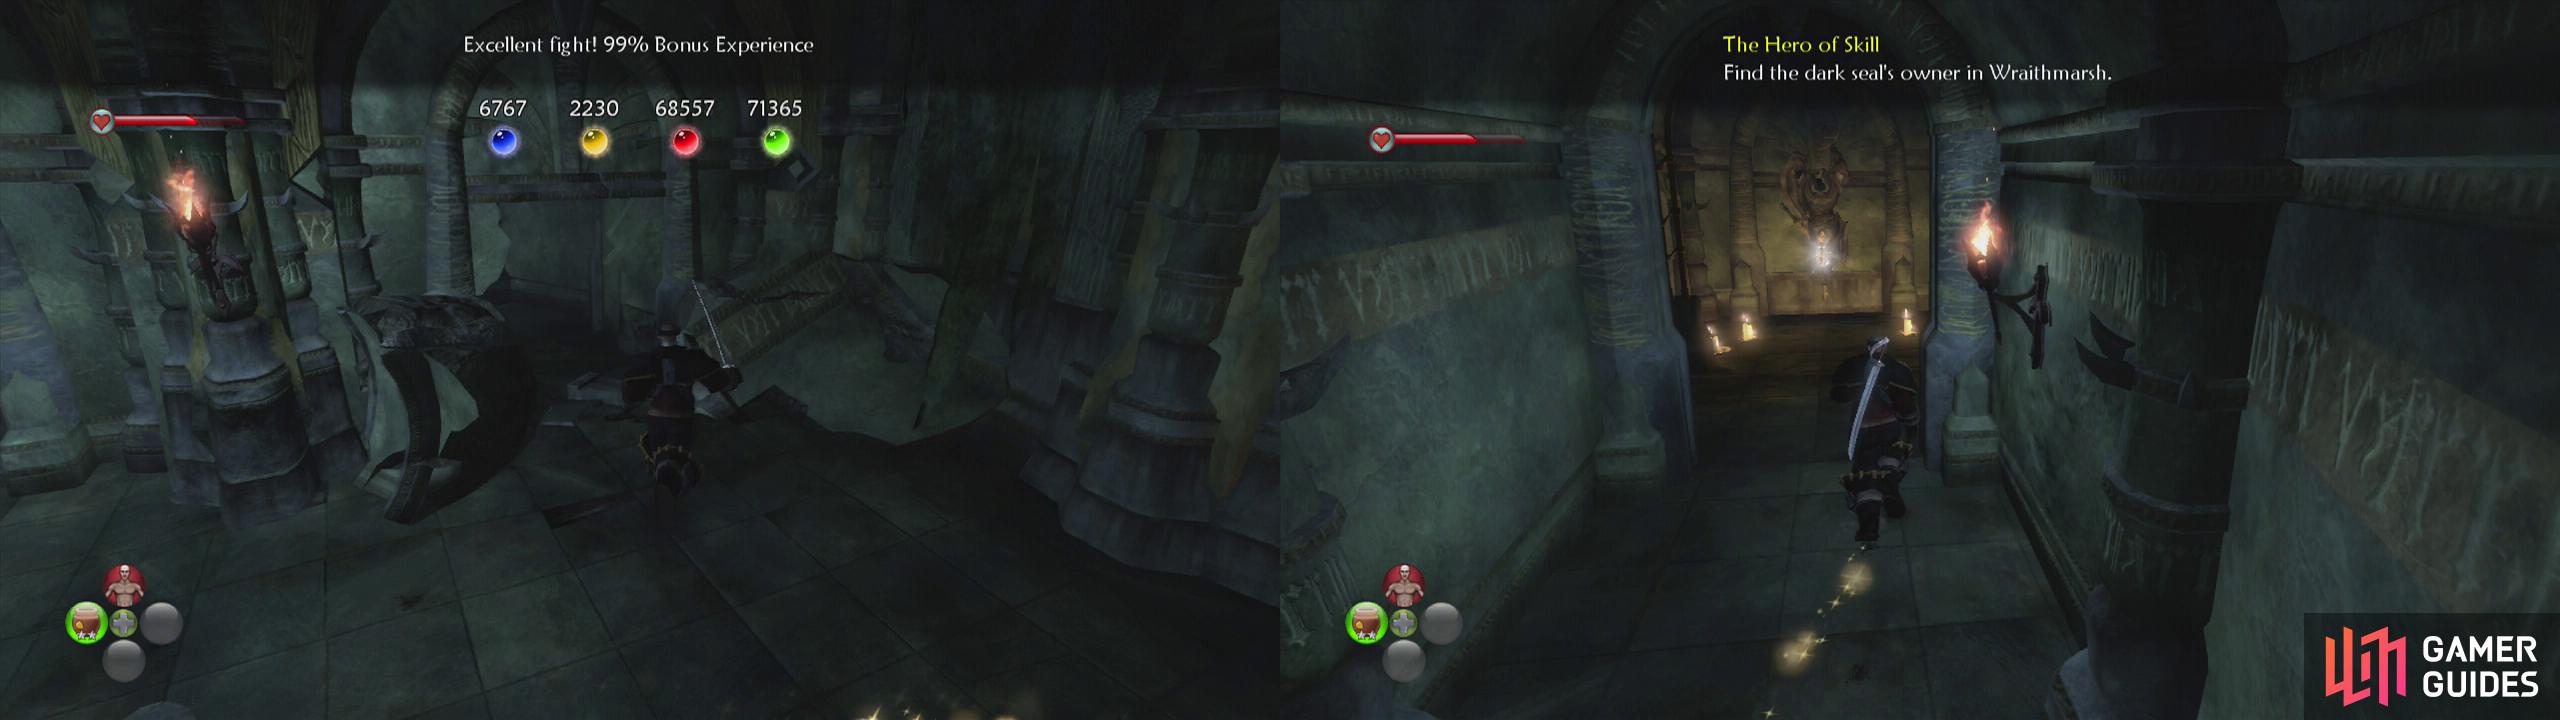 After clearing the room, destroy the weak wall and grab the silver key from inside (right).